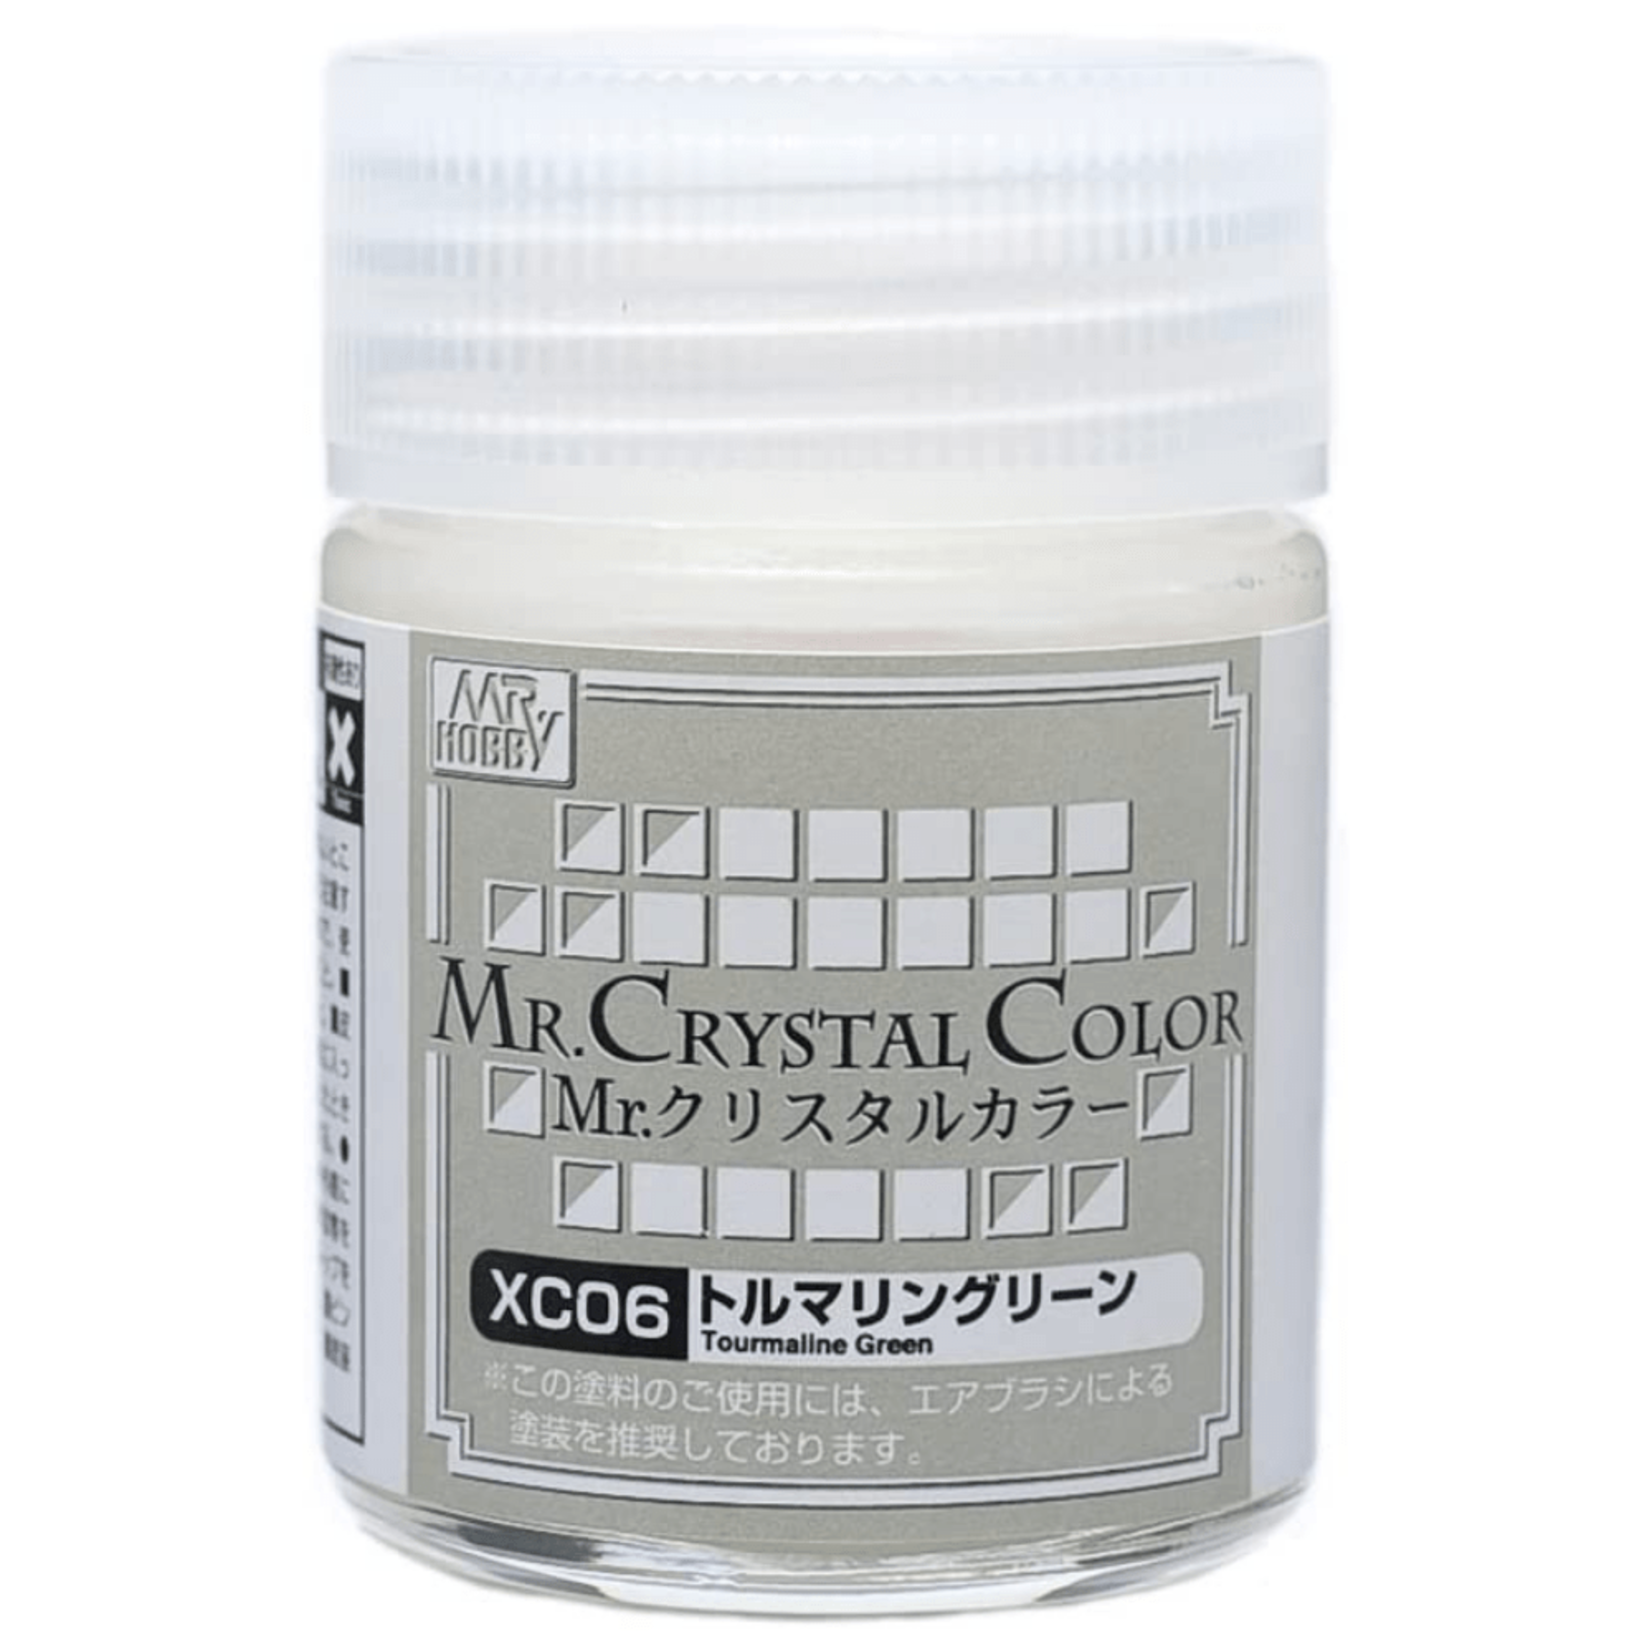 GSI Creos GNZ-XC06 Mr Hobby XC06 MR. Crystal Color Tourmaline Green - - Lacquer 18ml